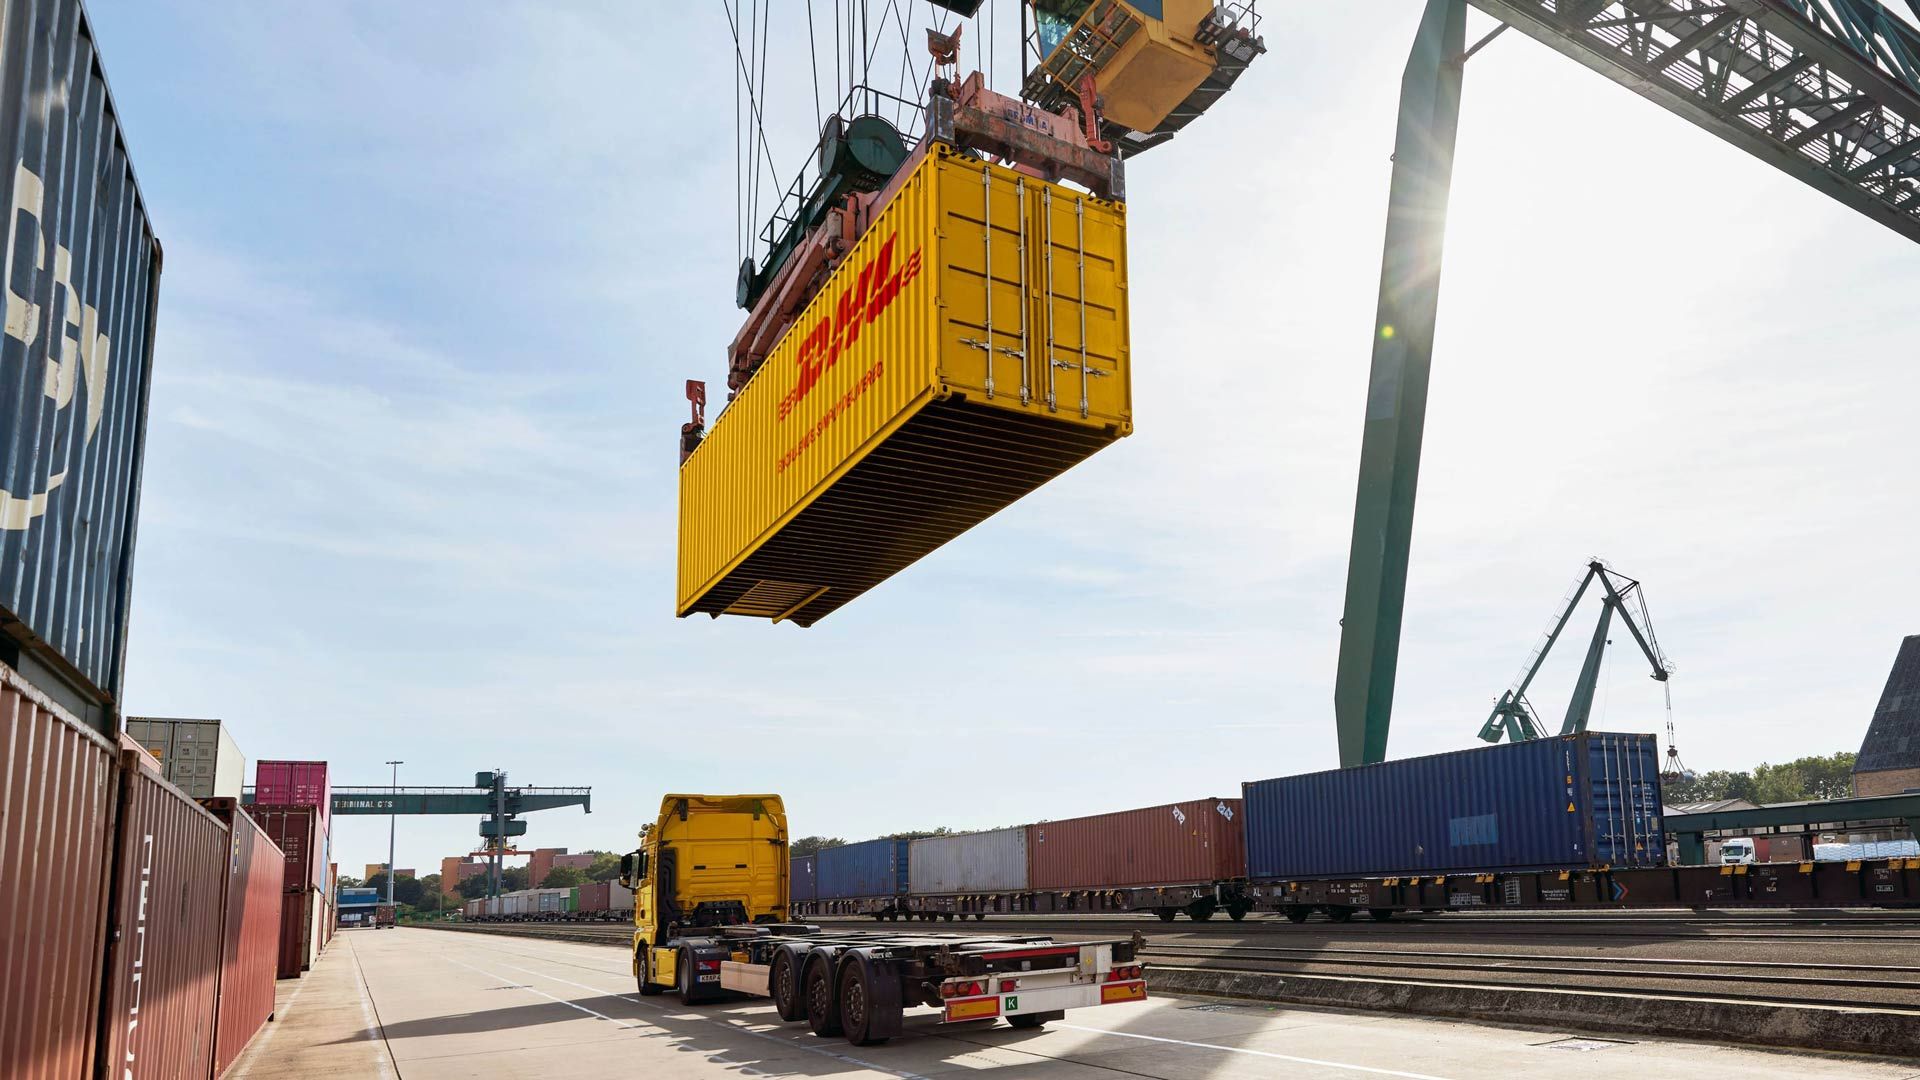 Volume of import-export cargo transported by containers increases